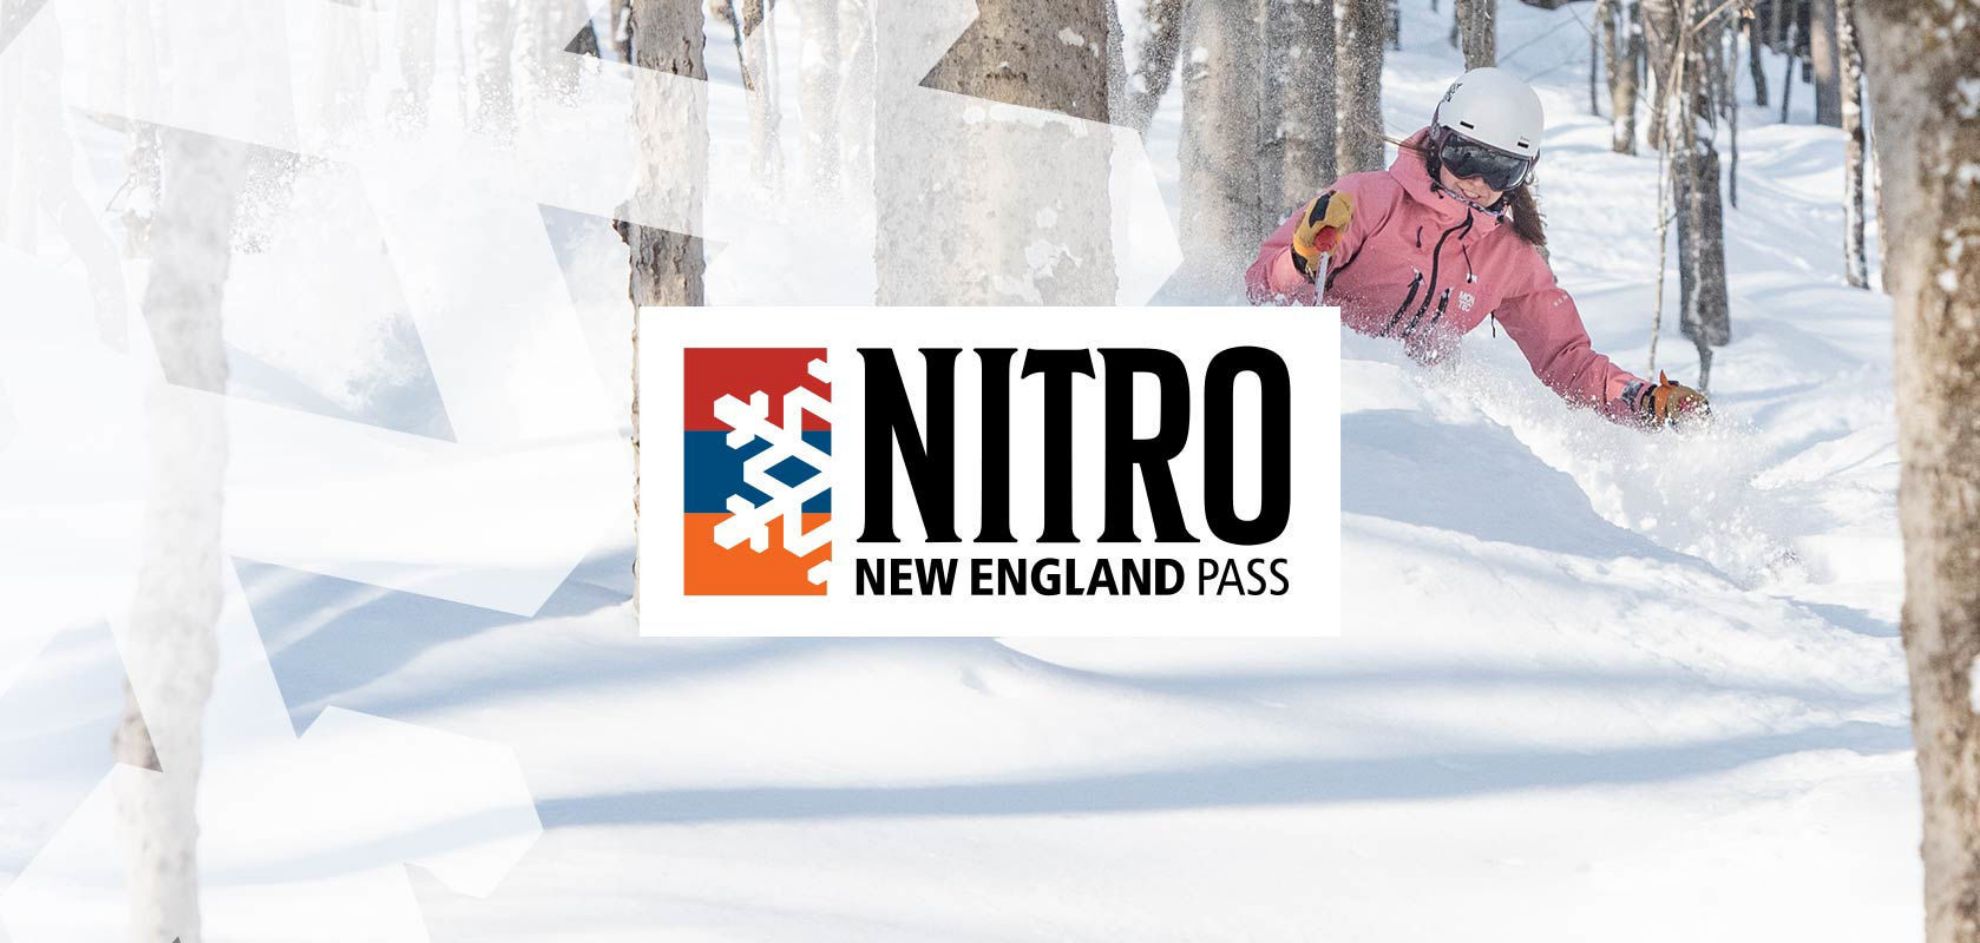 Skier in deep powder; New England Pass graphic logo over image